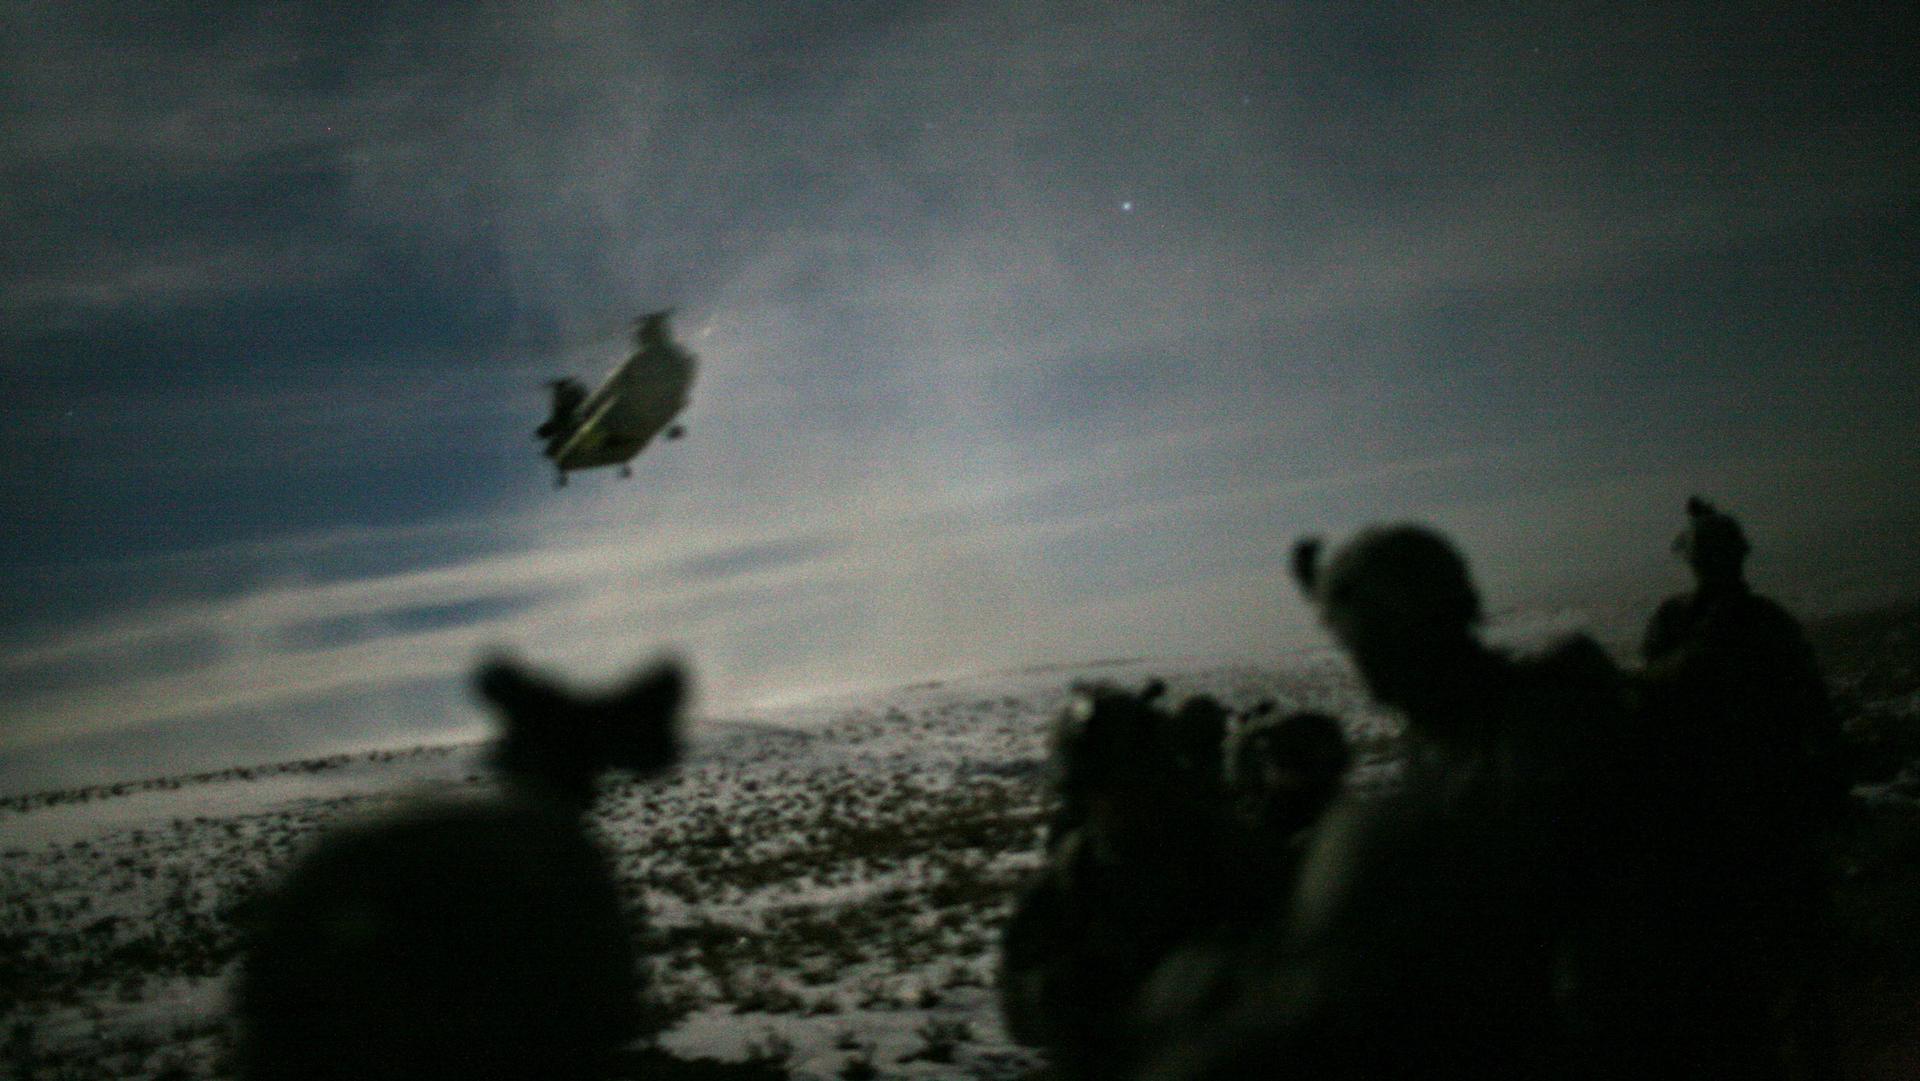 A large helicopter is shown in the distance making its landing approach with the shadow of soldiers in the nearground.